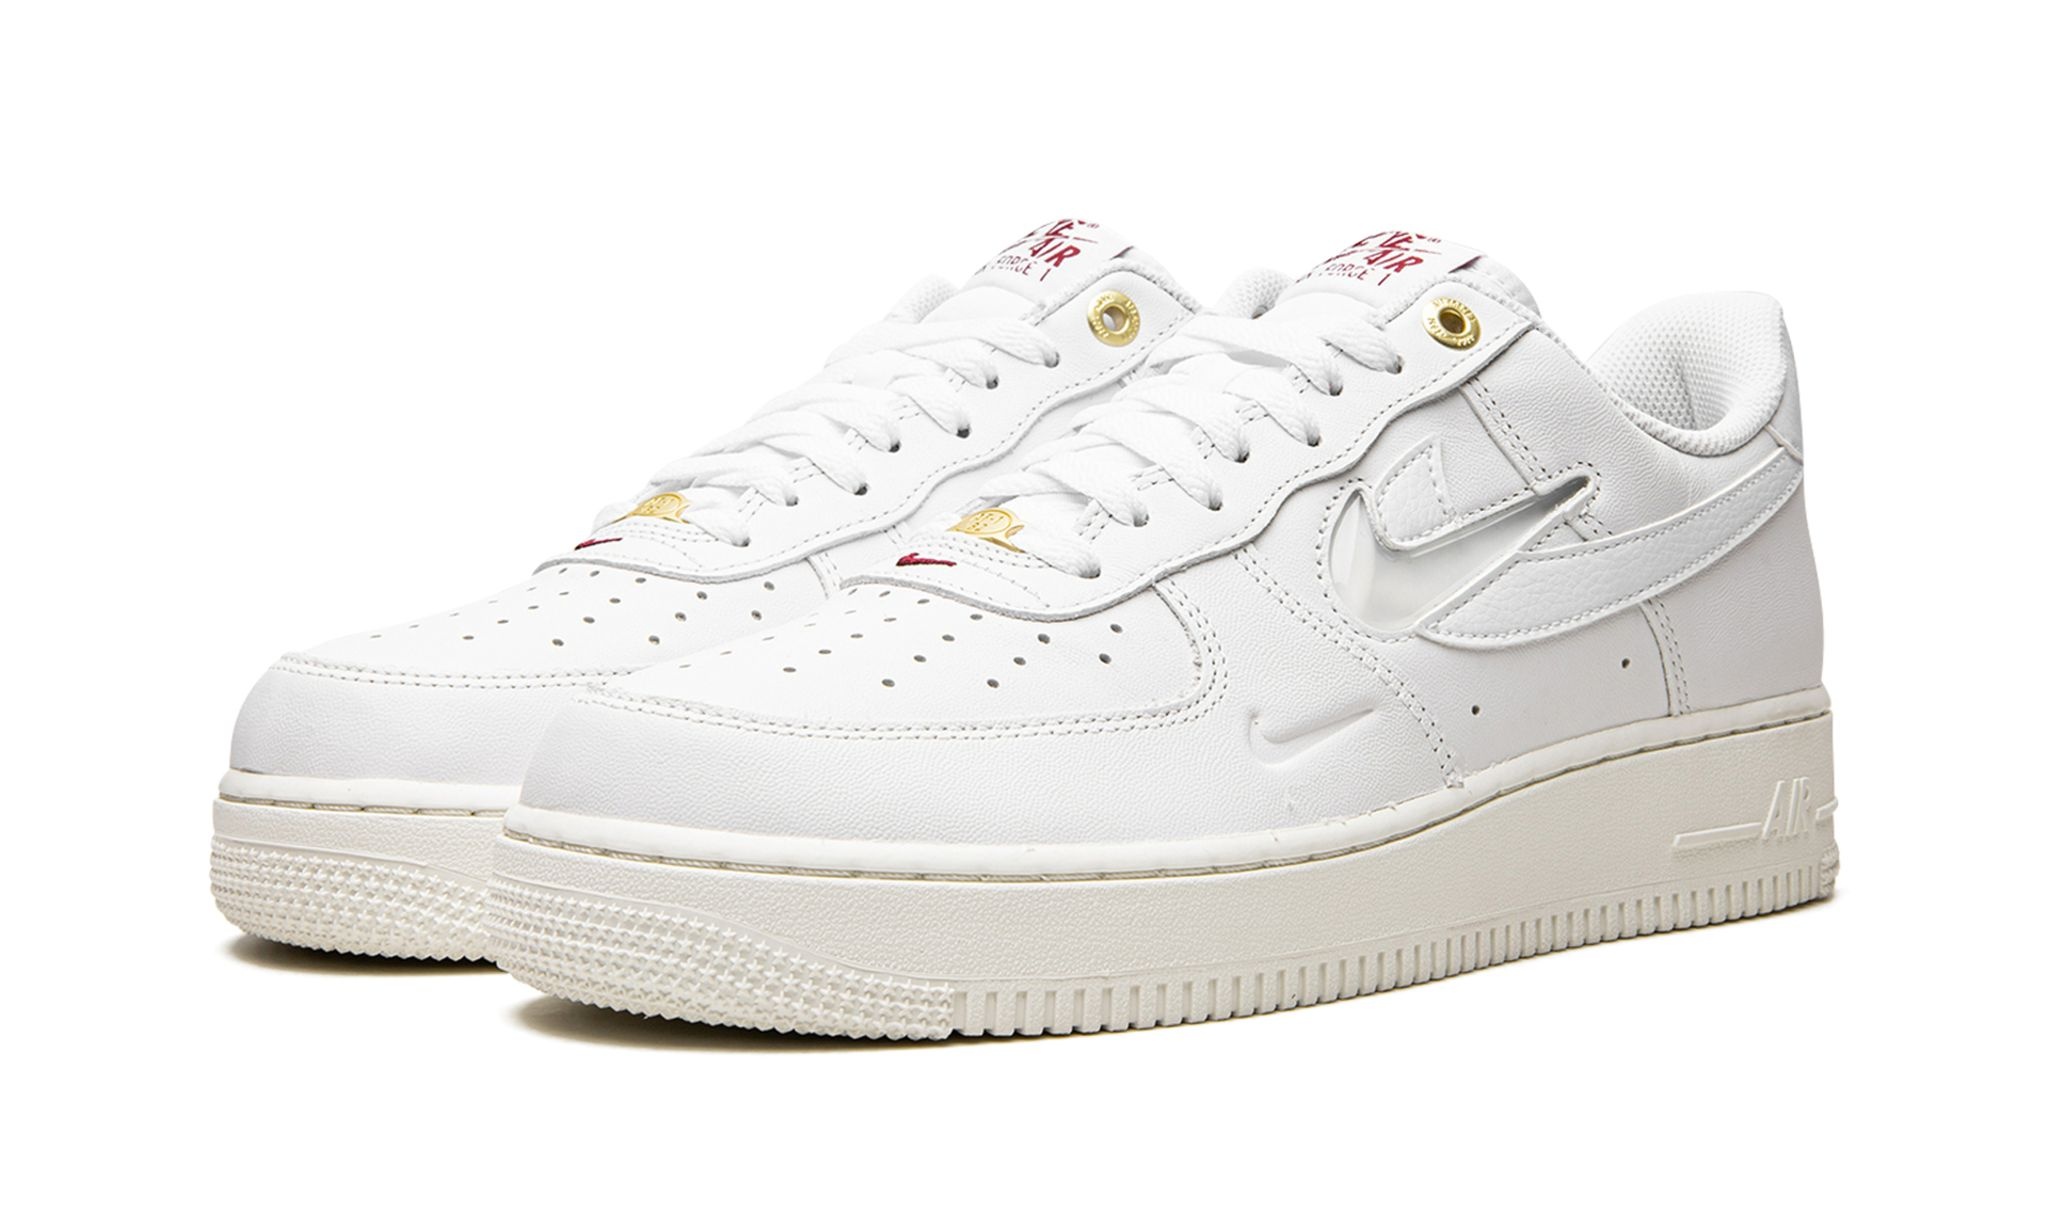 Air Force 1 Low '07 LV8 "Join Forces Sail" - 2